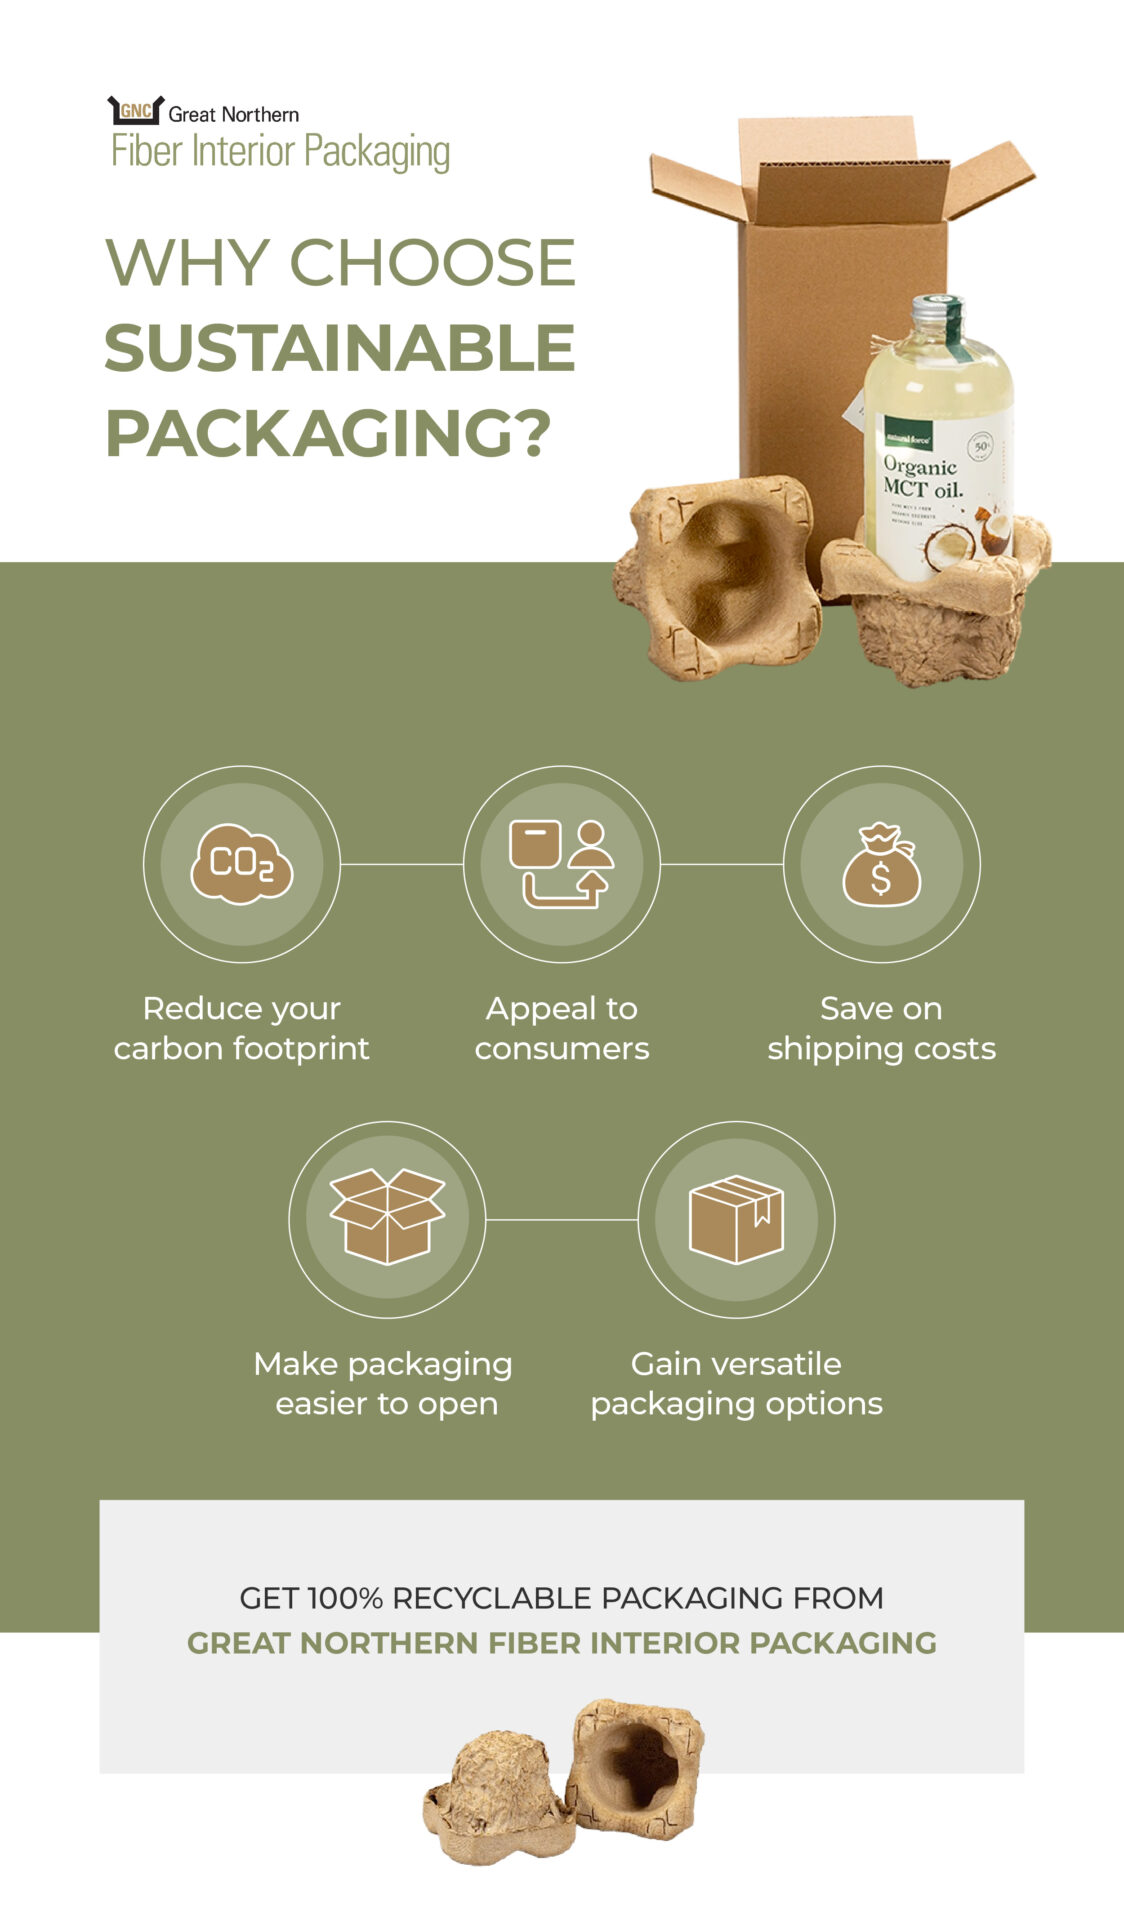 Why choose sustainable packaging